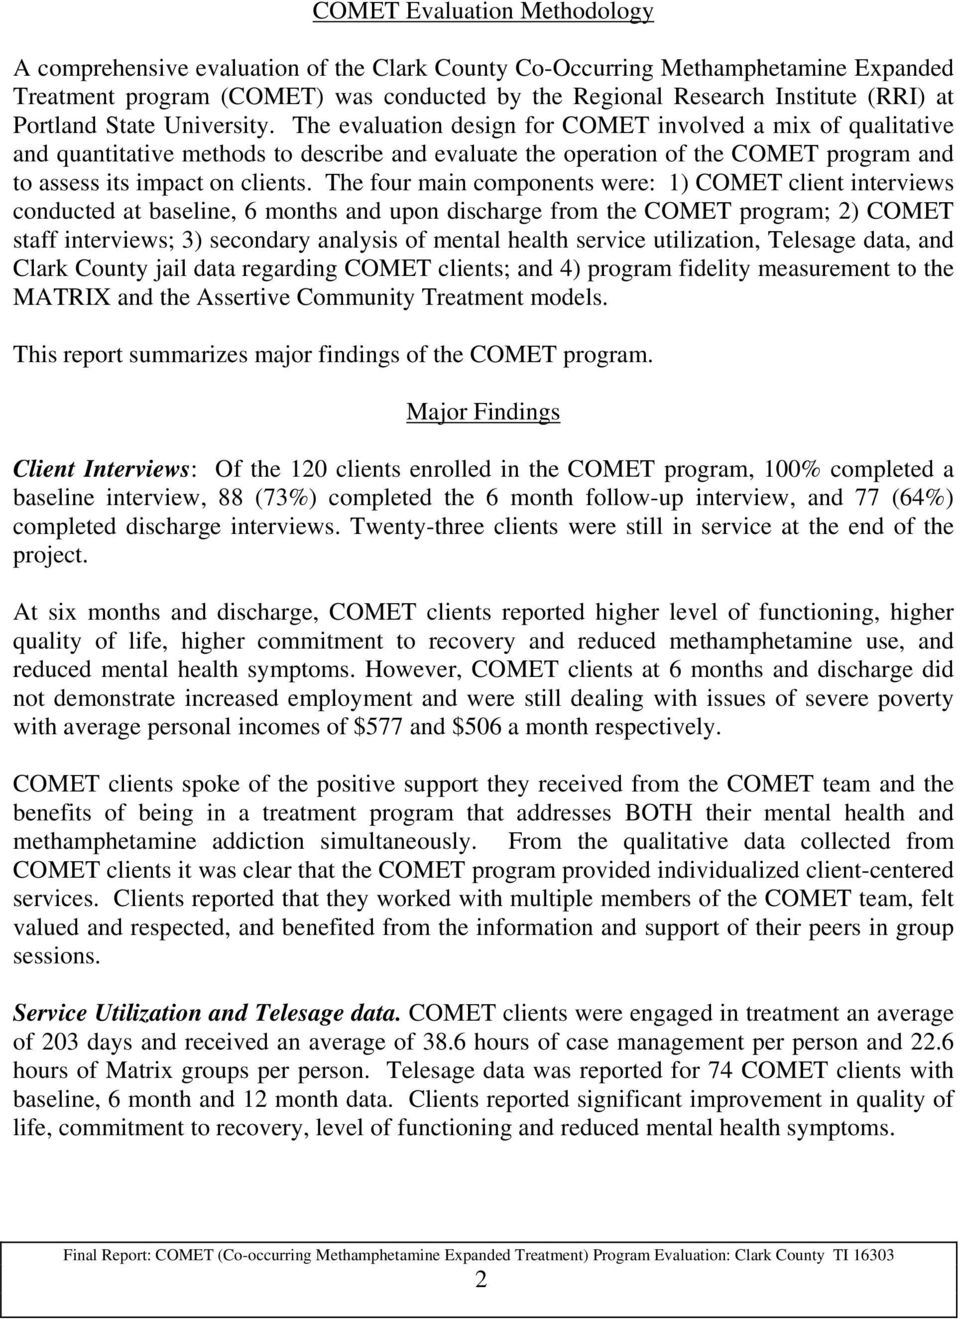 The evaluation design for COMET involved a mix of qualitative and quantitative methods to describe and evaluate the operation of the COMET program and to assess its impact on clients.